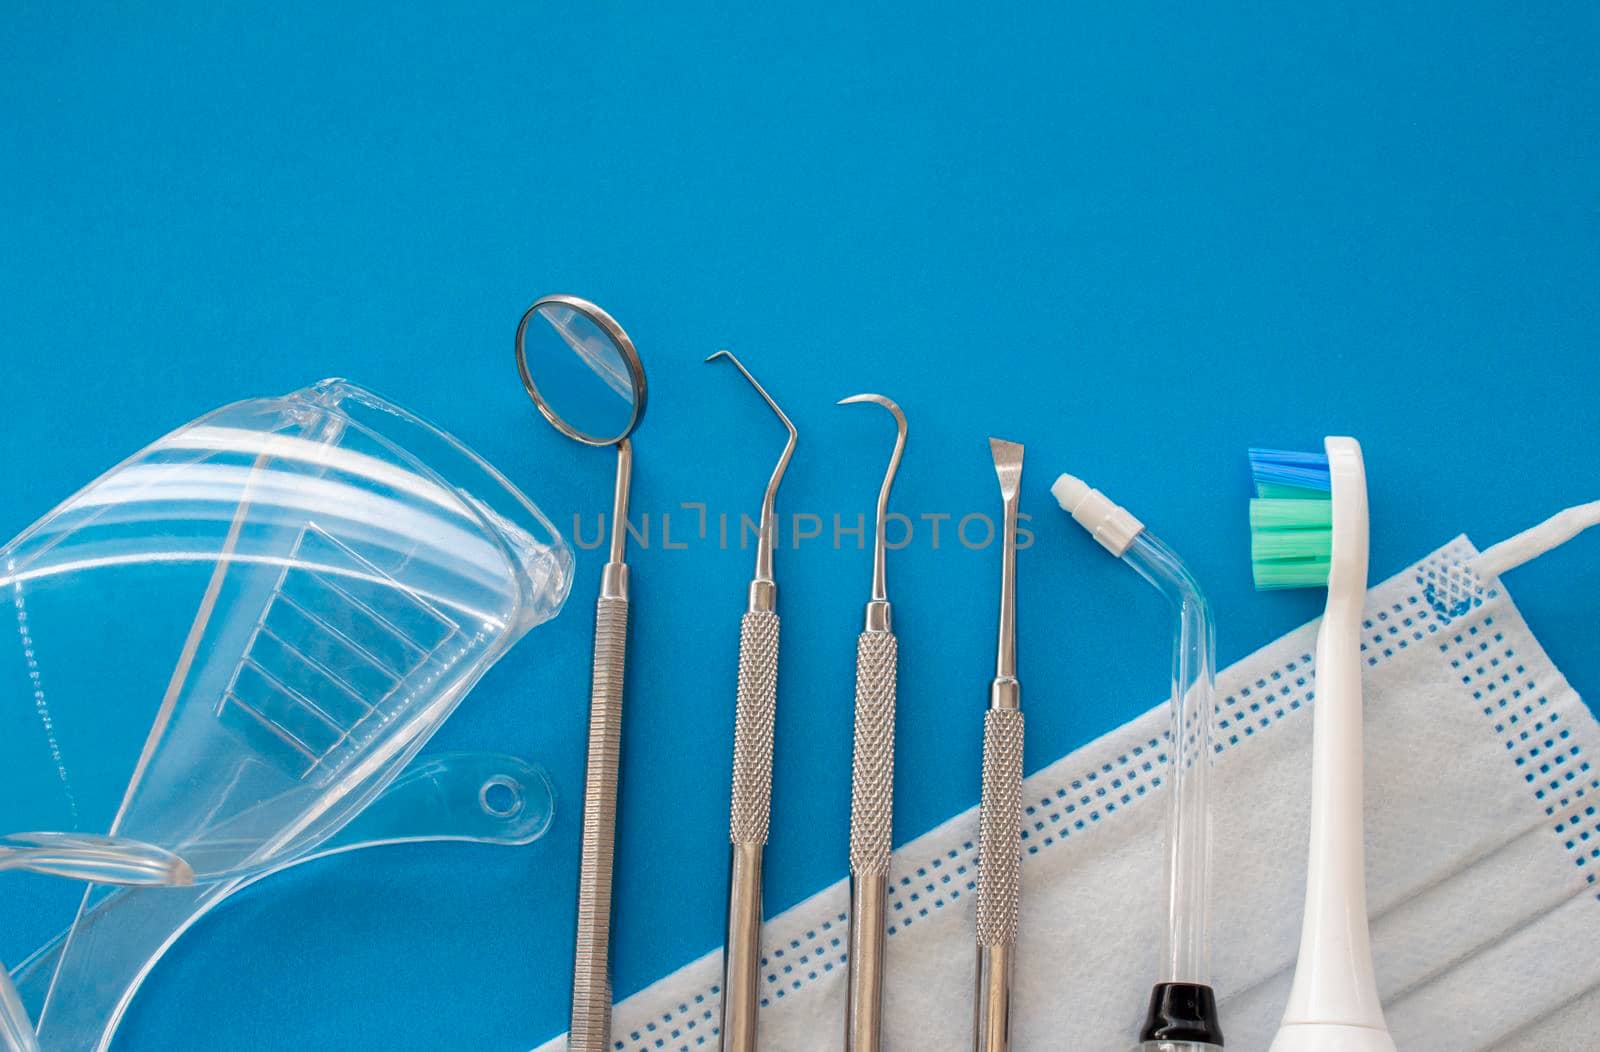 Dentist tools on blue surface close up. Professional Dental Hygiene cleaning tools. Calculus and Plaque Remover Set, Dental Scaler And Mouth Mirror Instruments Hygienist tools by oasisamuel